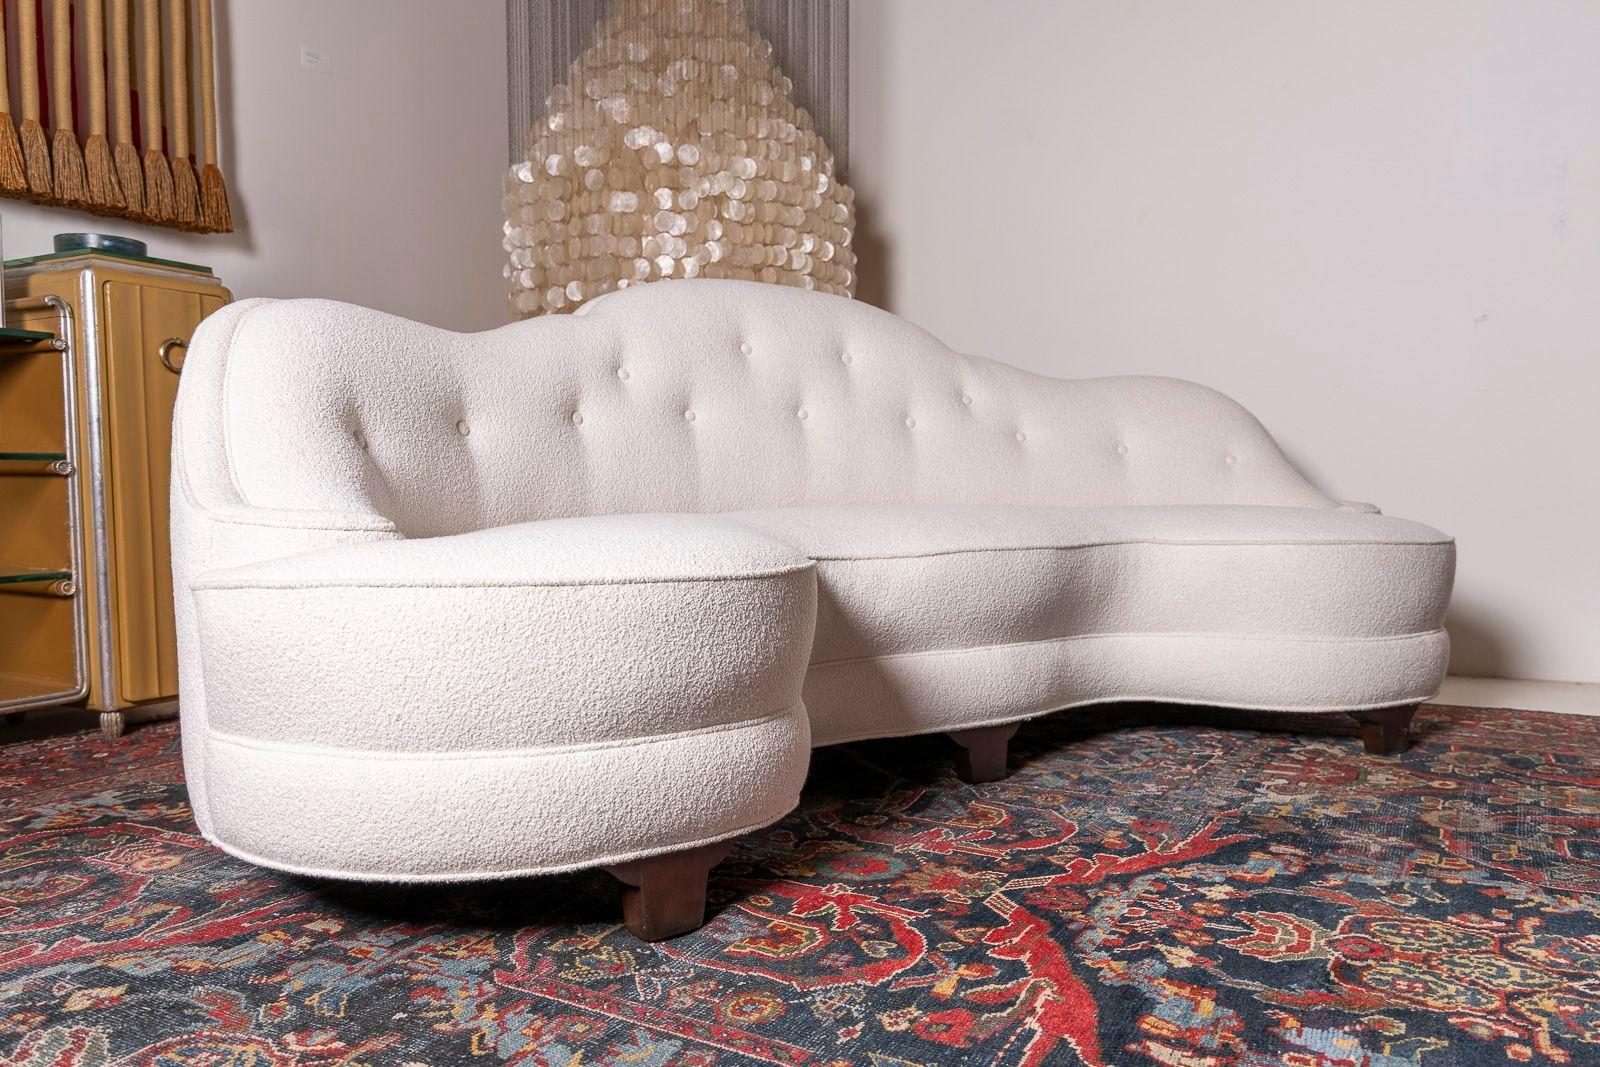 20th Century Edward Wormley Dunbar Oasis Sofas in Ivory Boucle Early First Generation 1930s For Sale